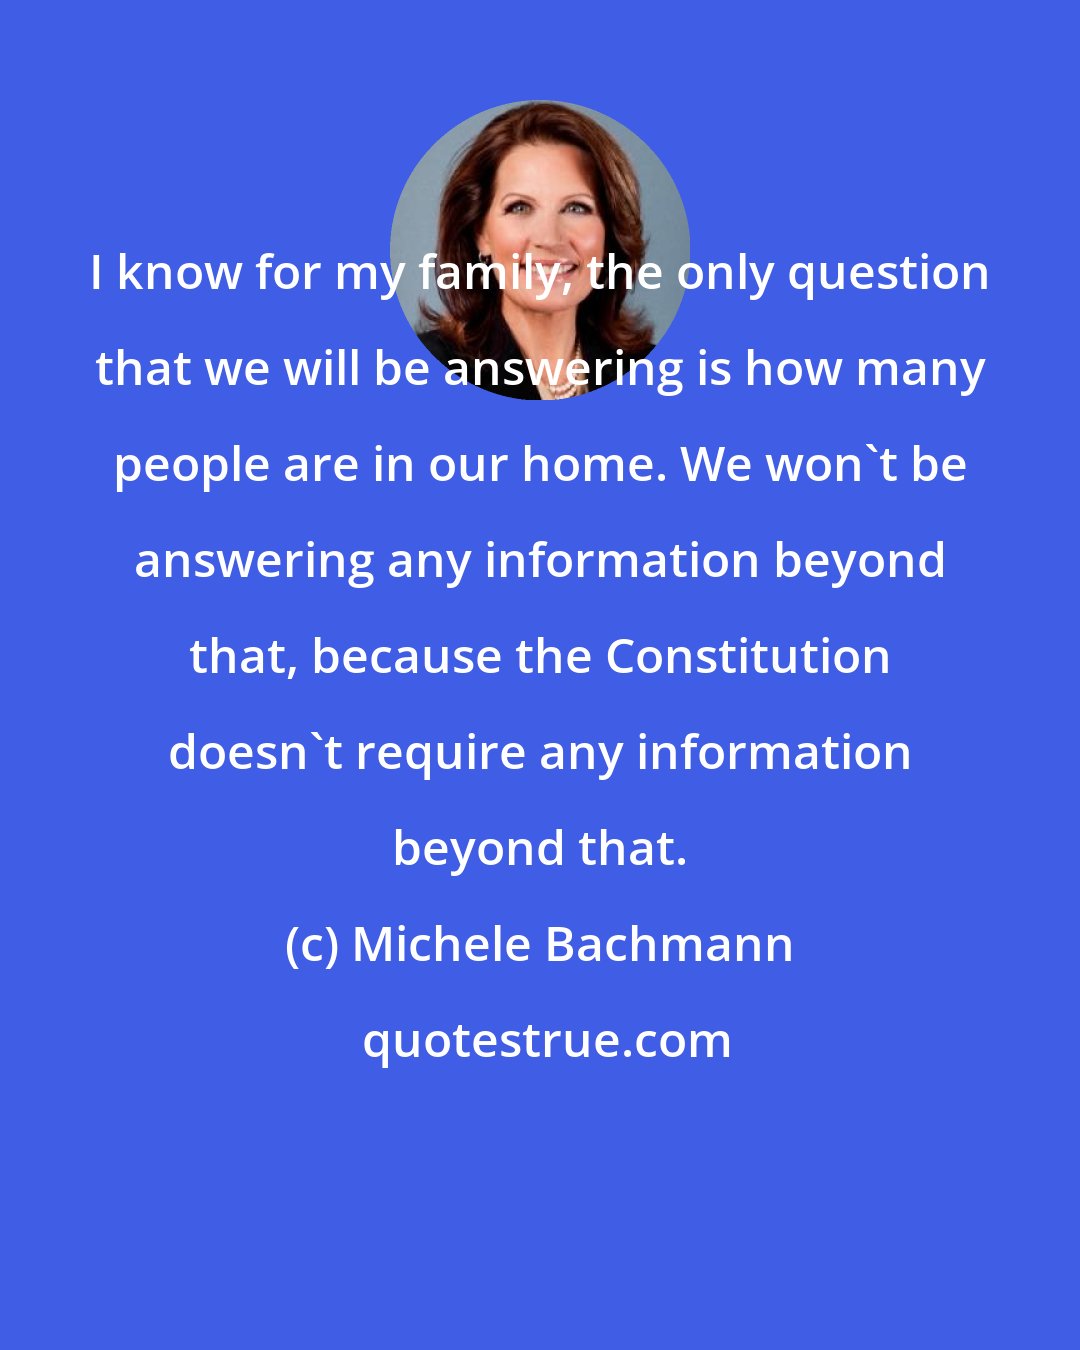 Michele Bachmann: I know for my family, the only question that we will be answering is how many people are in our home. We won't be answering any information beyond that, because the Constitution doesn't require any information beyond that.